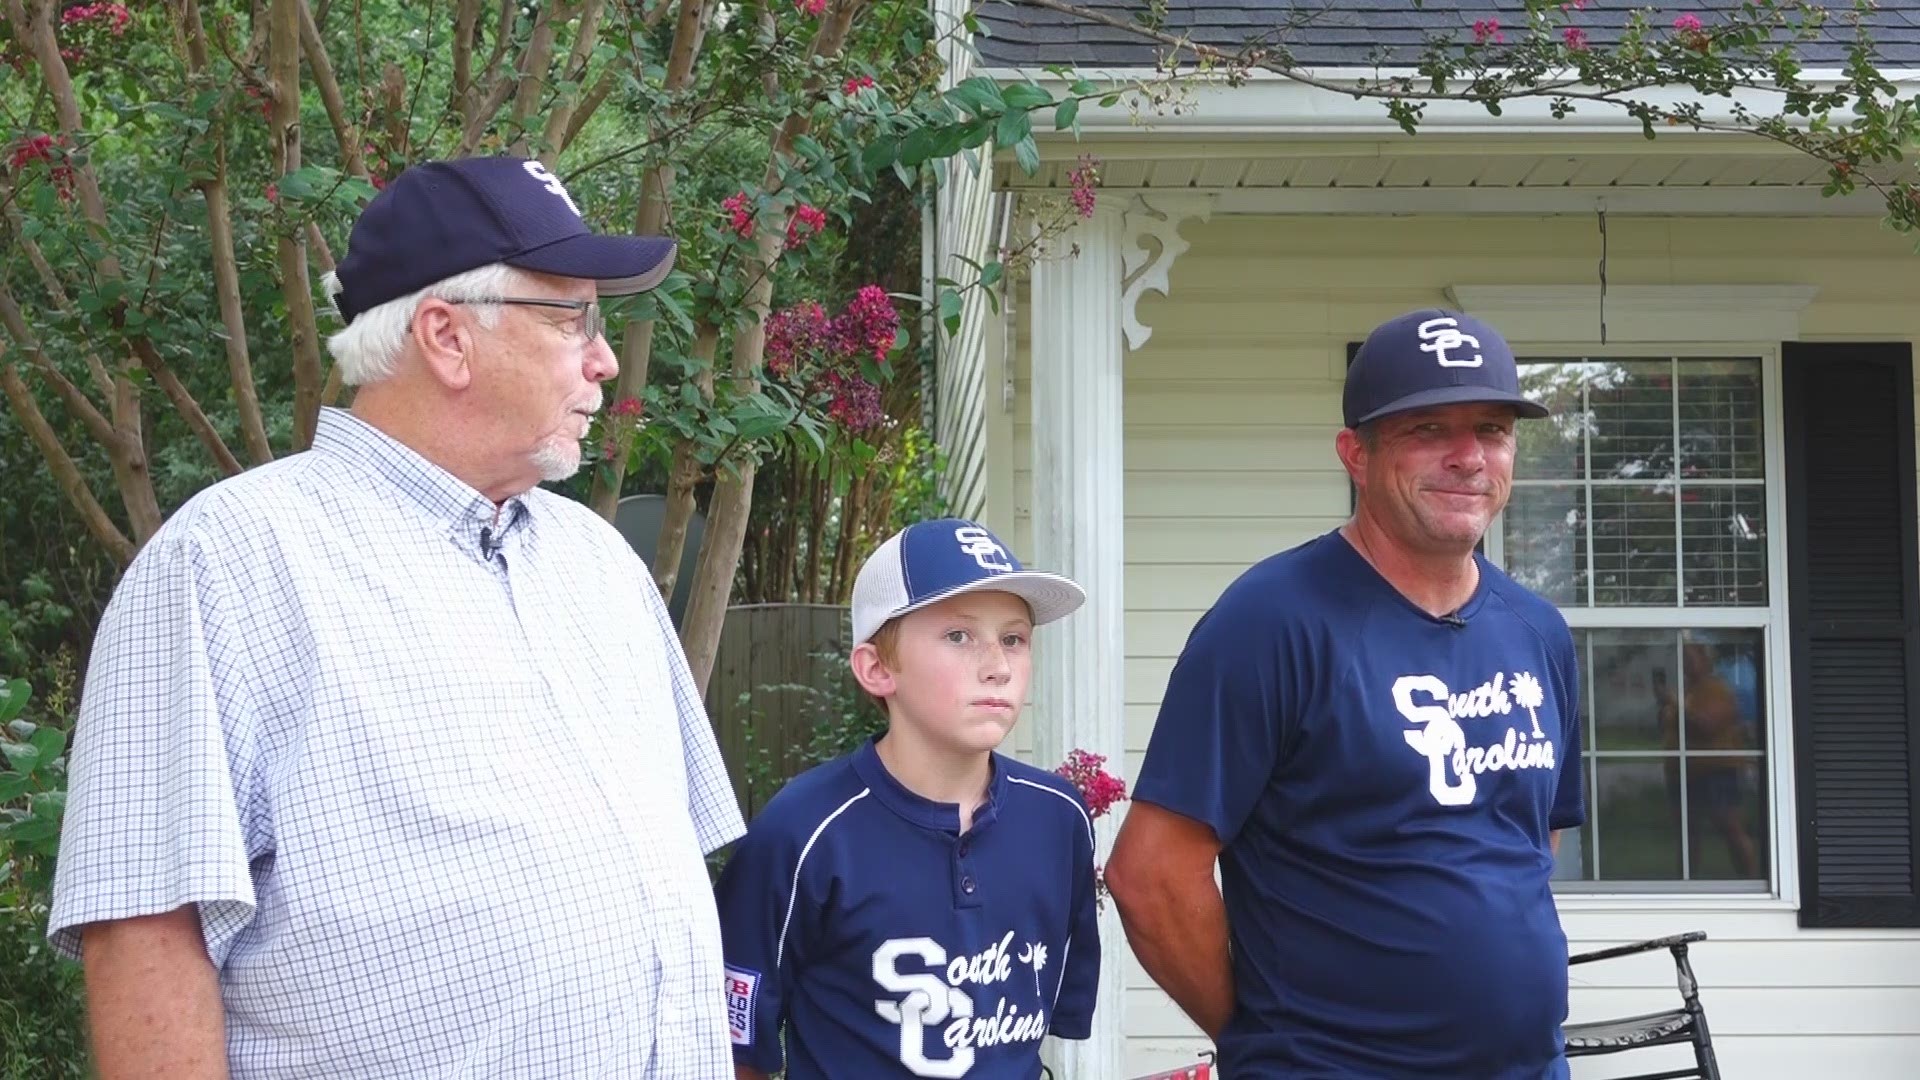 To some, baseball is just a sport. To the Culley family, it's everything. The trio of a grandfather, son, and grandson have made history by each playing in the Dixie Youth World Series over the span of half a century.